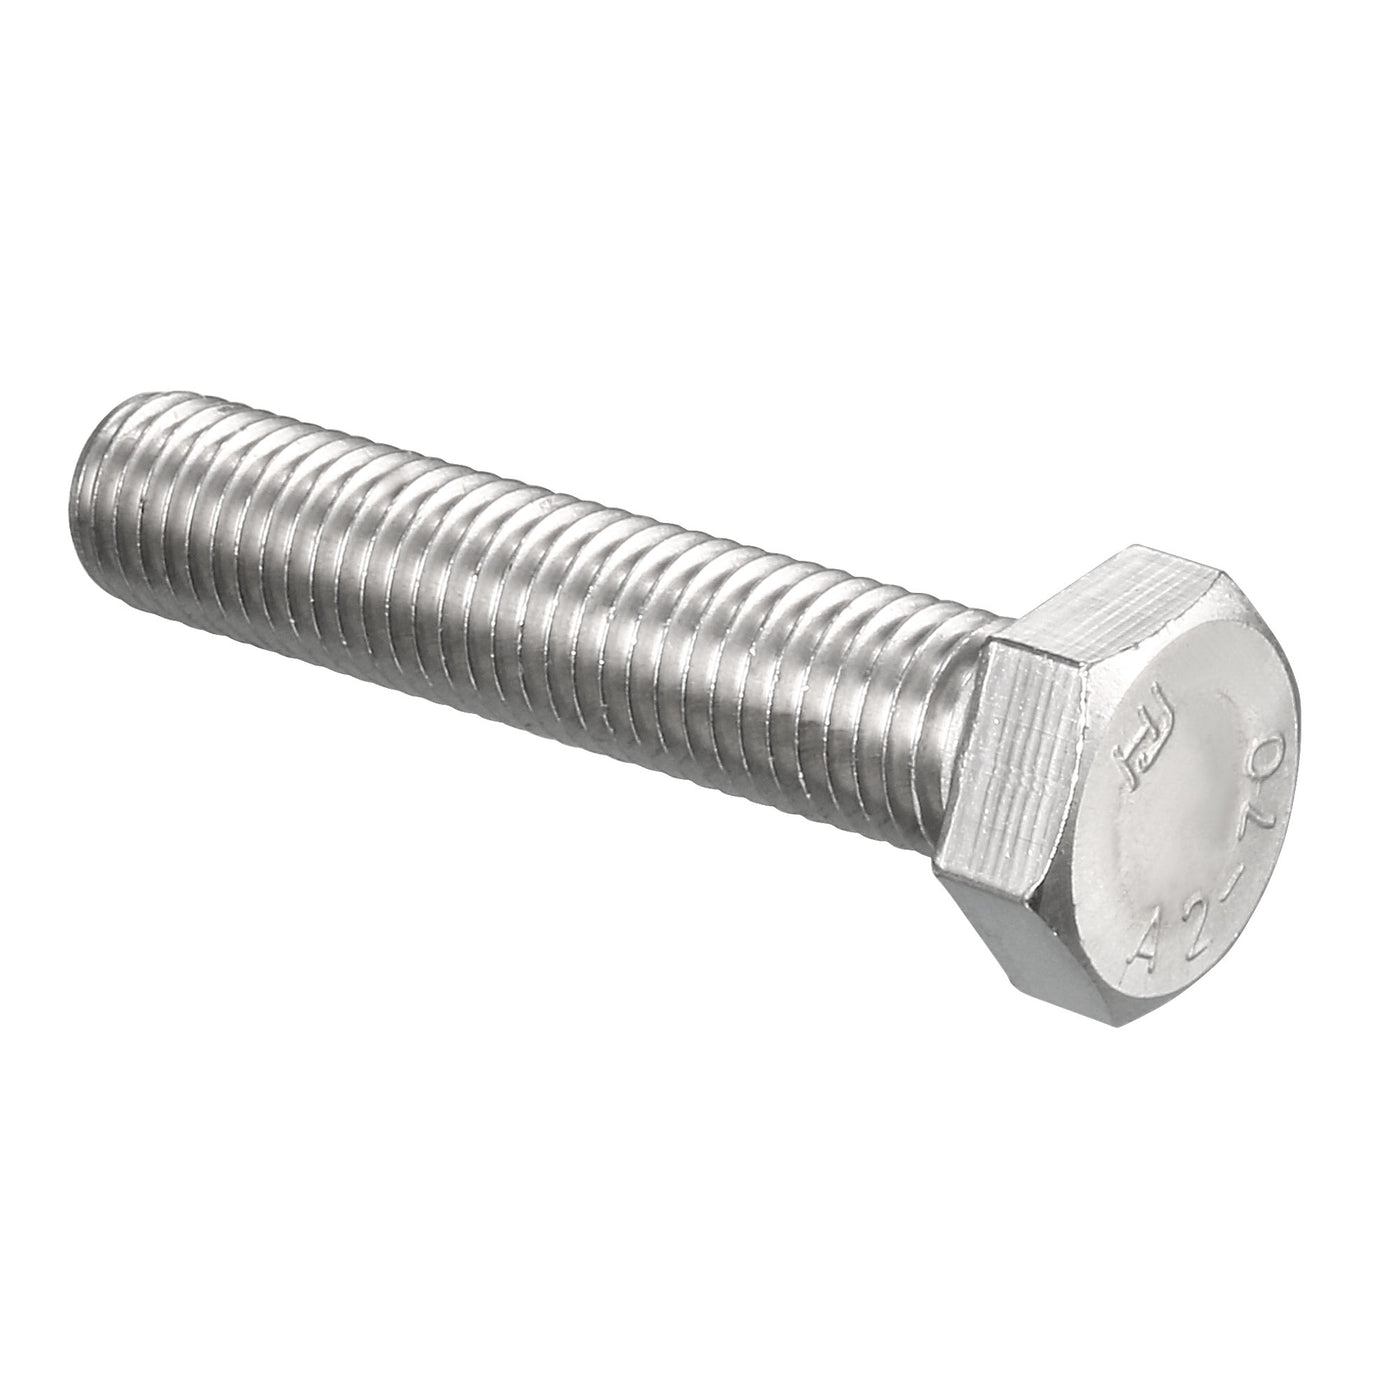 Uxcell Uxcell Hex Screw Bolt, Metric M14x100mm 304 Stainless Steel Fully Threaded Bolts 1pcs